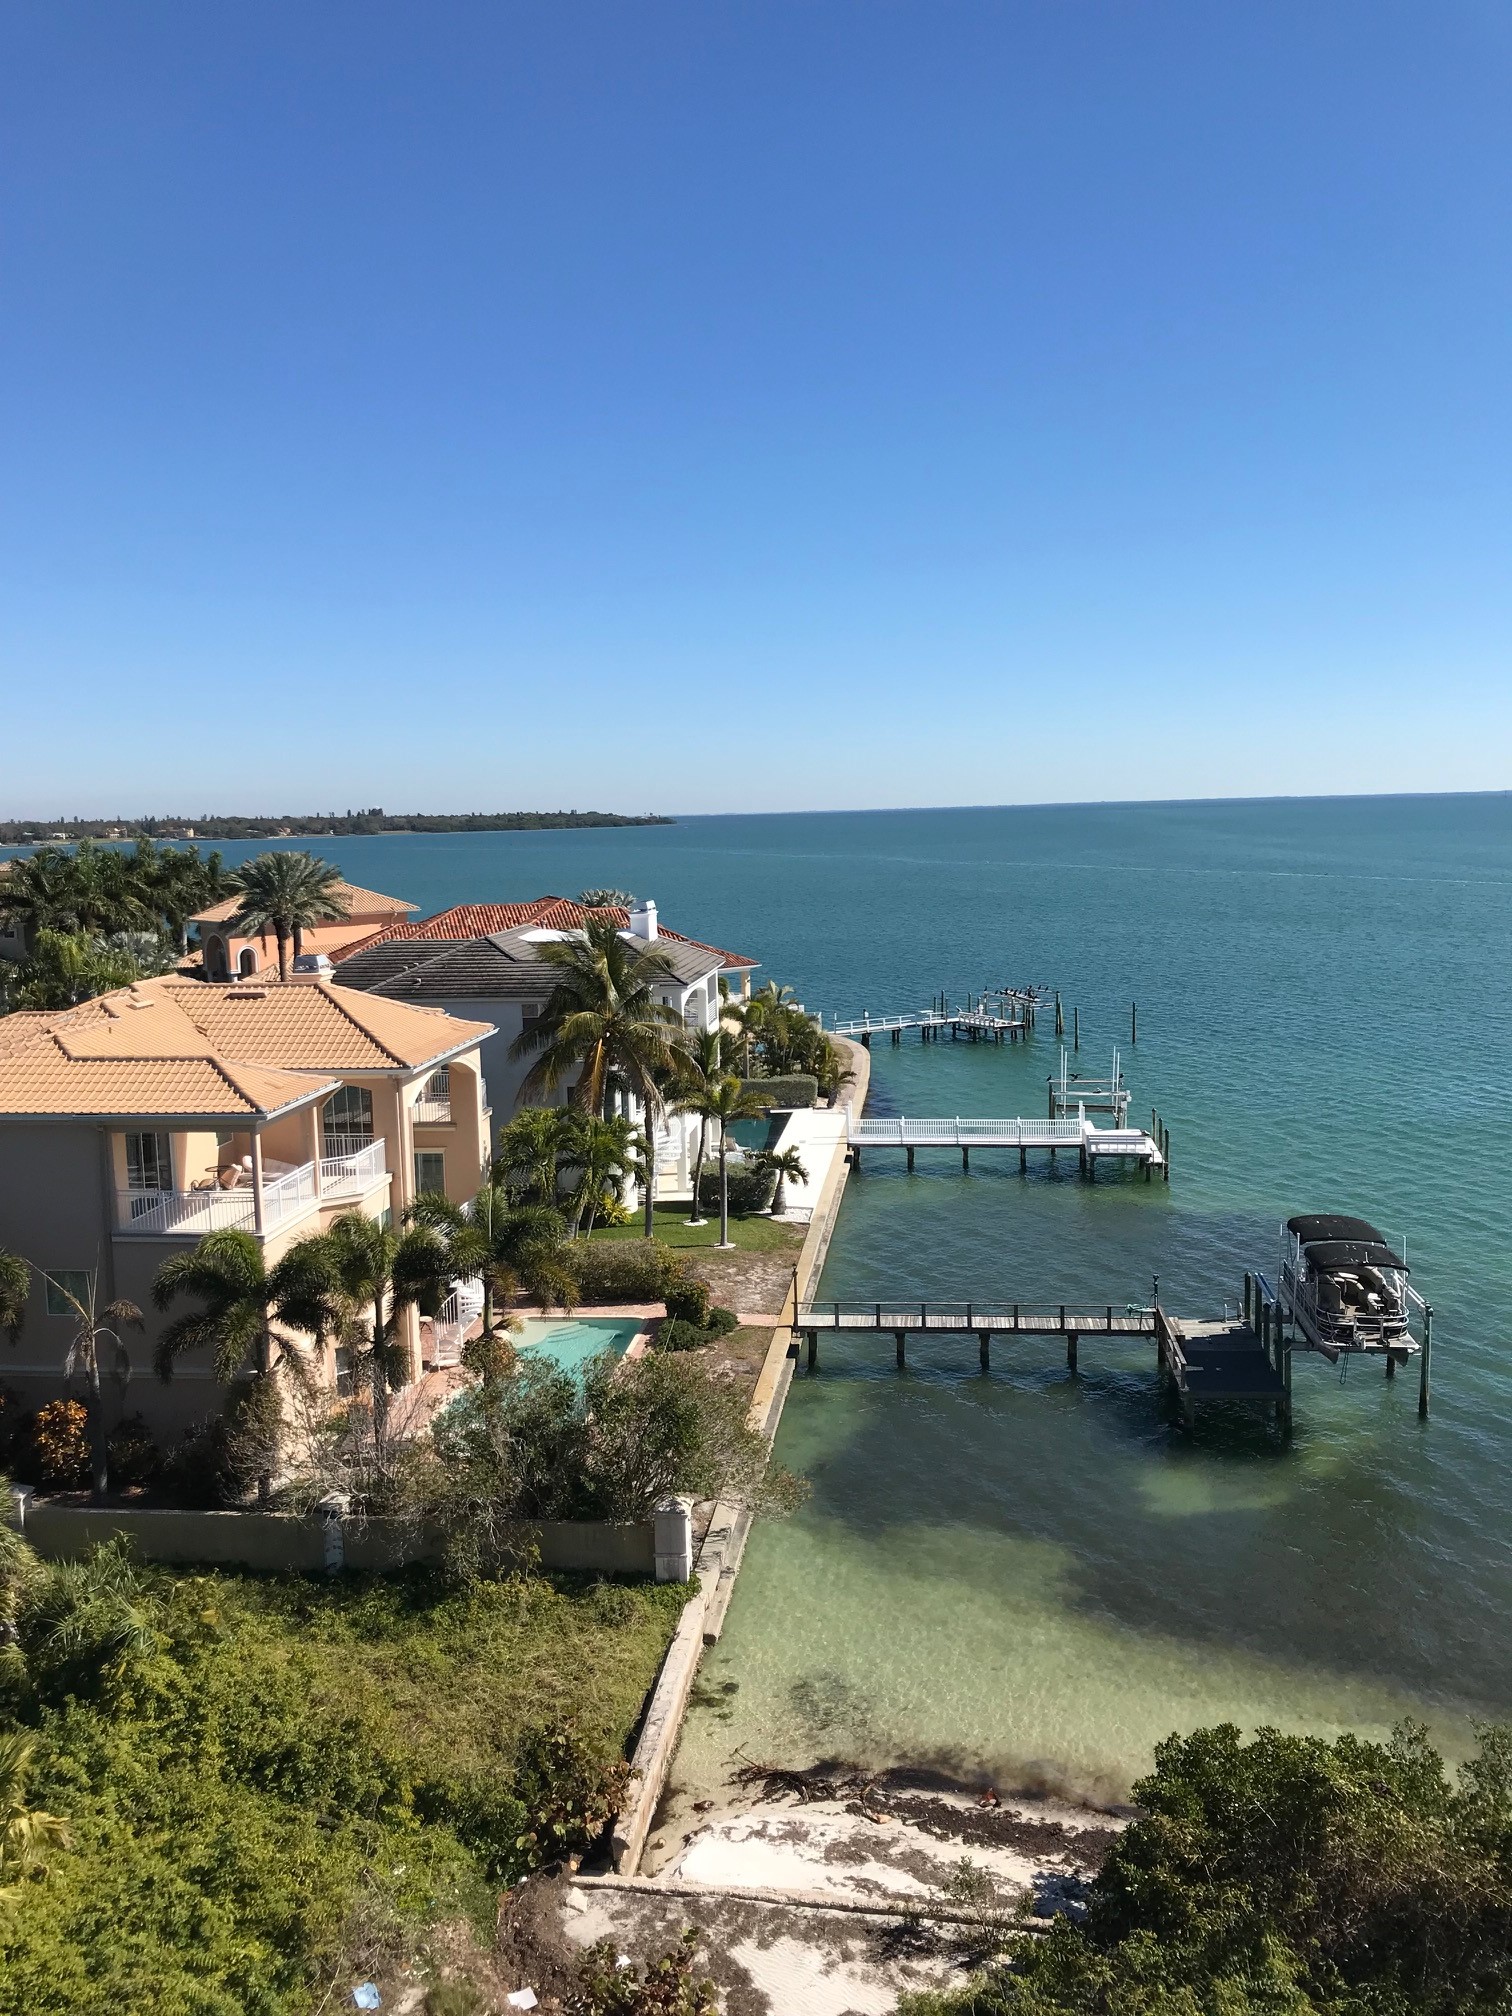 Prices of Waterfront Property in Pinellas County and St Petersburg FL